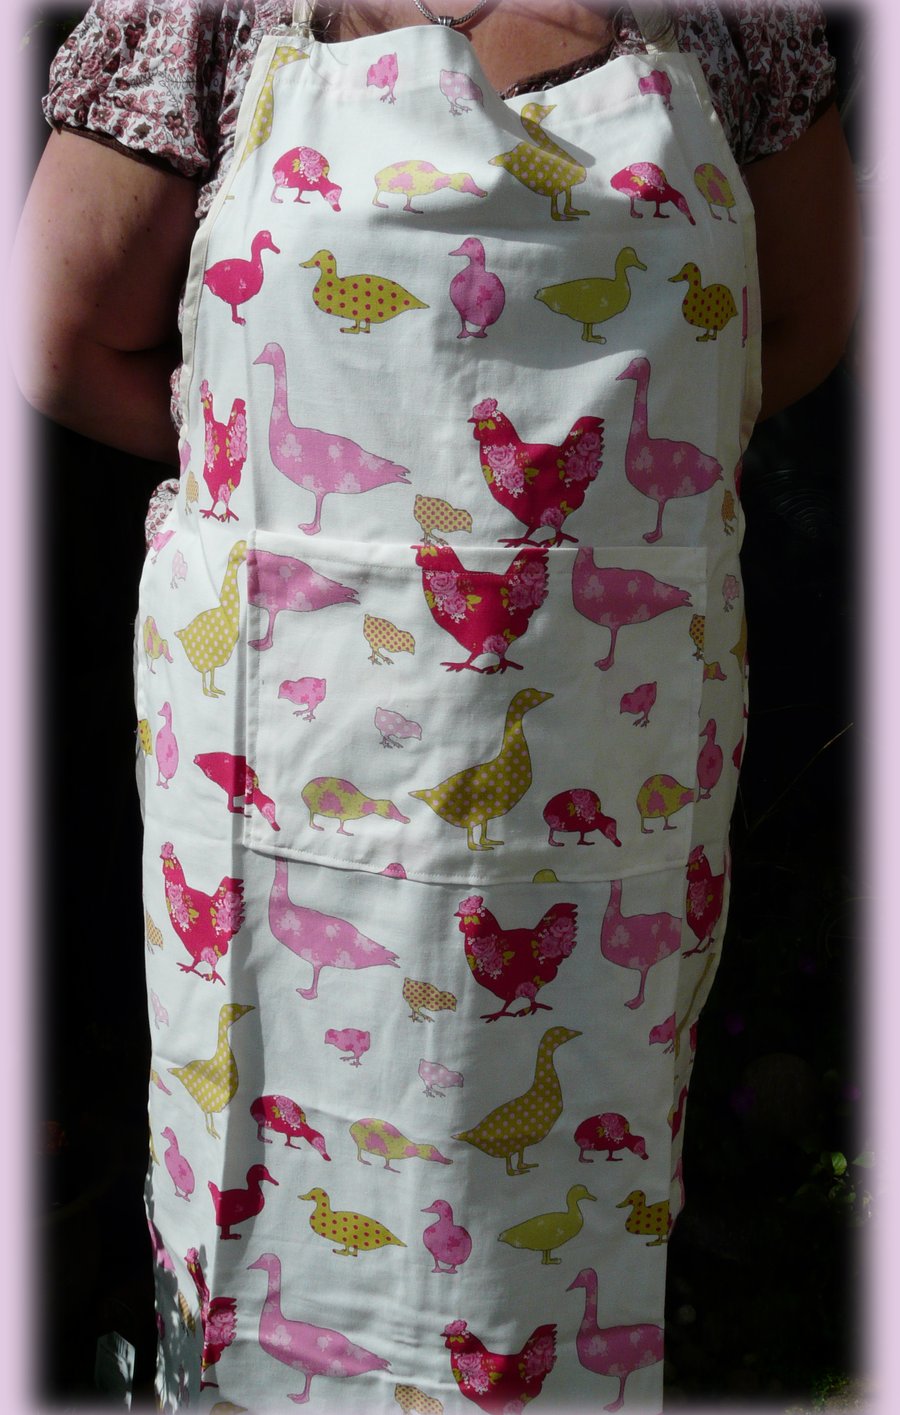 Apron for the fuller busted lady!Chickens and Ducks.